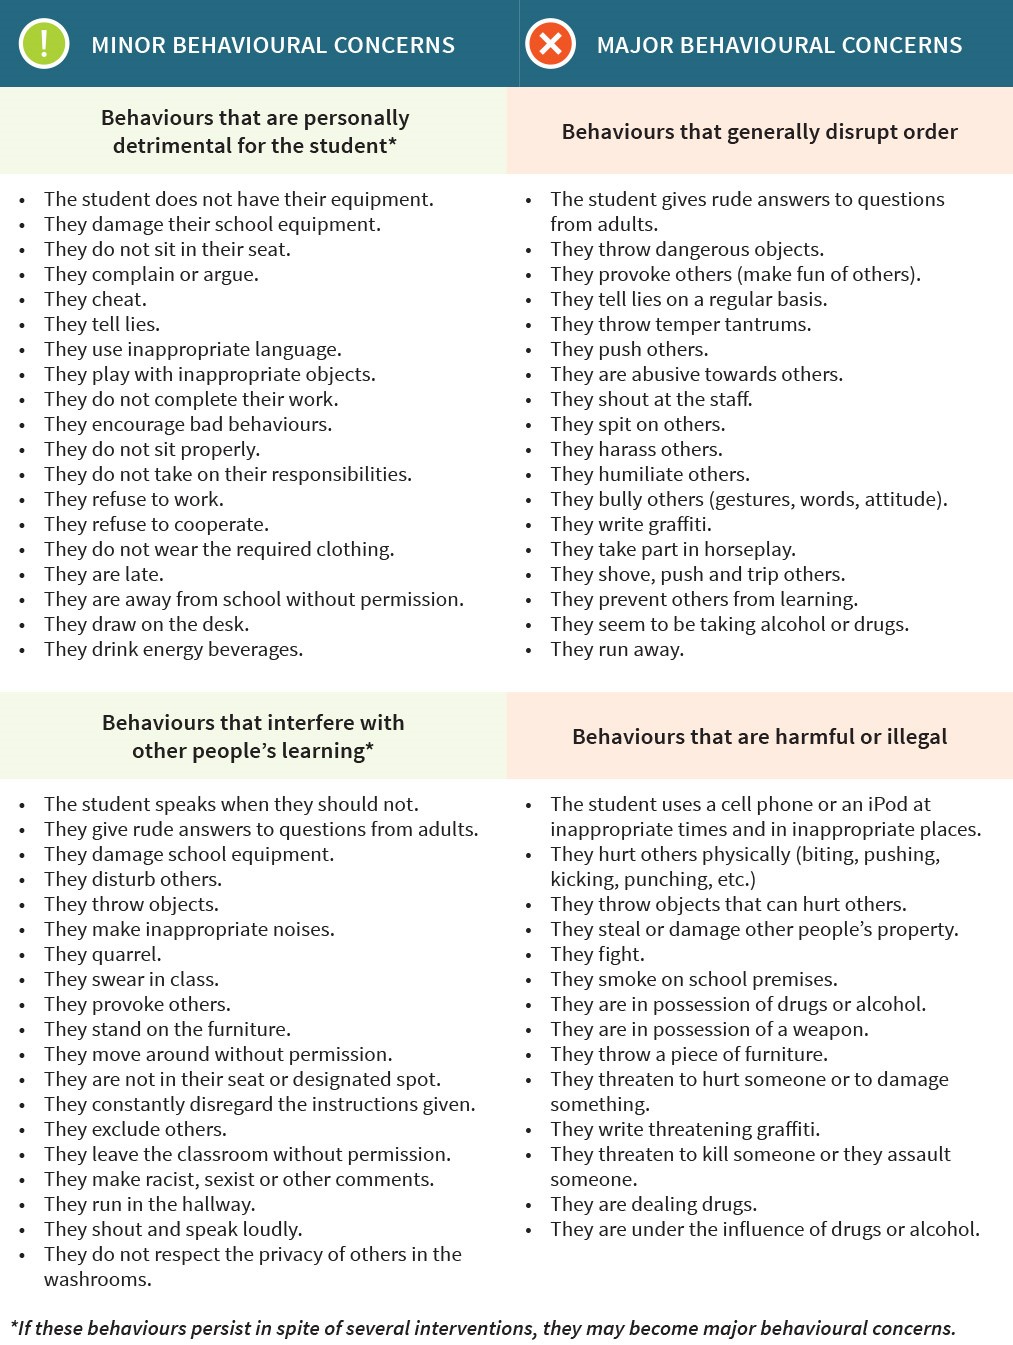 List of behaviours classified into minor and major behavioural concerns. Minor behavioural concerns are further broken down into those that are personally detrimental to the student and those that interfere with the learning of others. Major behavioural concerns are further broken down into behaviours that disrupt classroom order and those that are harmful or illegal.